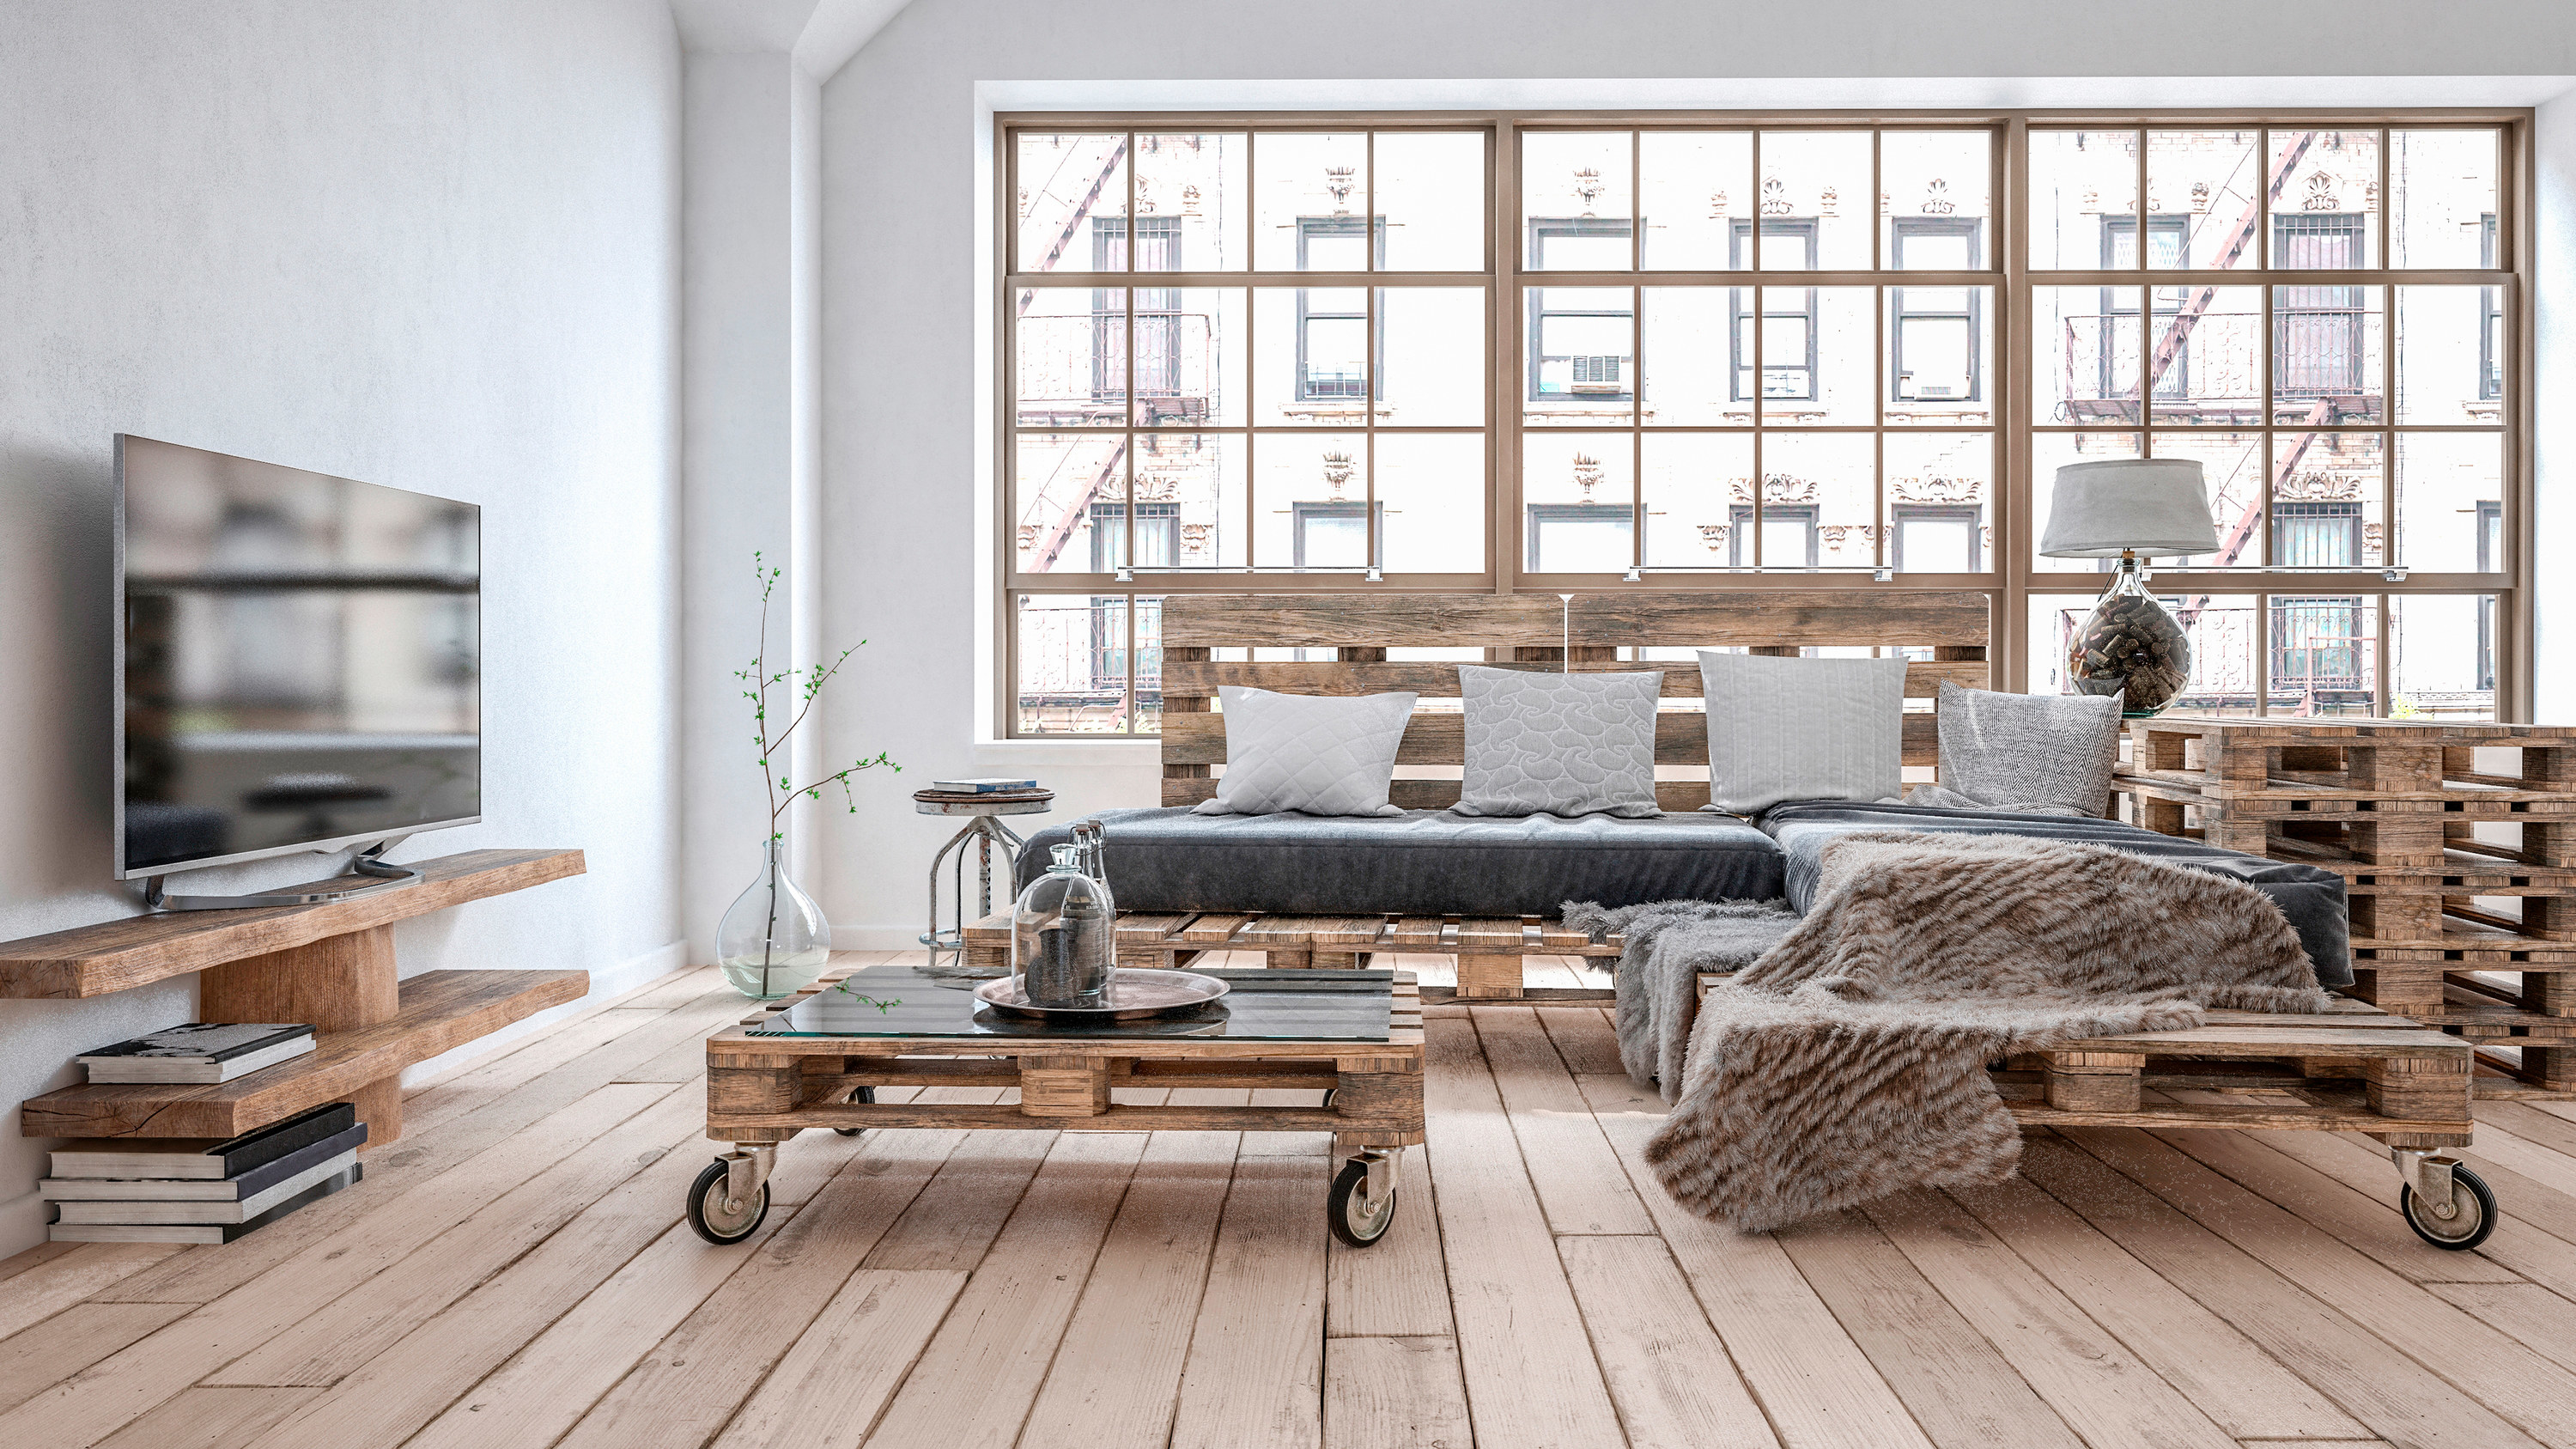 A living room with timber floors, big warehouse windows - all the furniture including sofa, table, end table, and shelves are made from wooden pallets